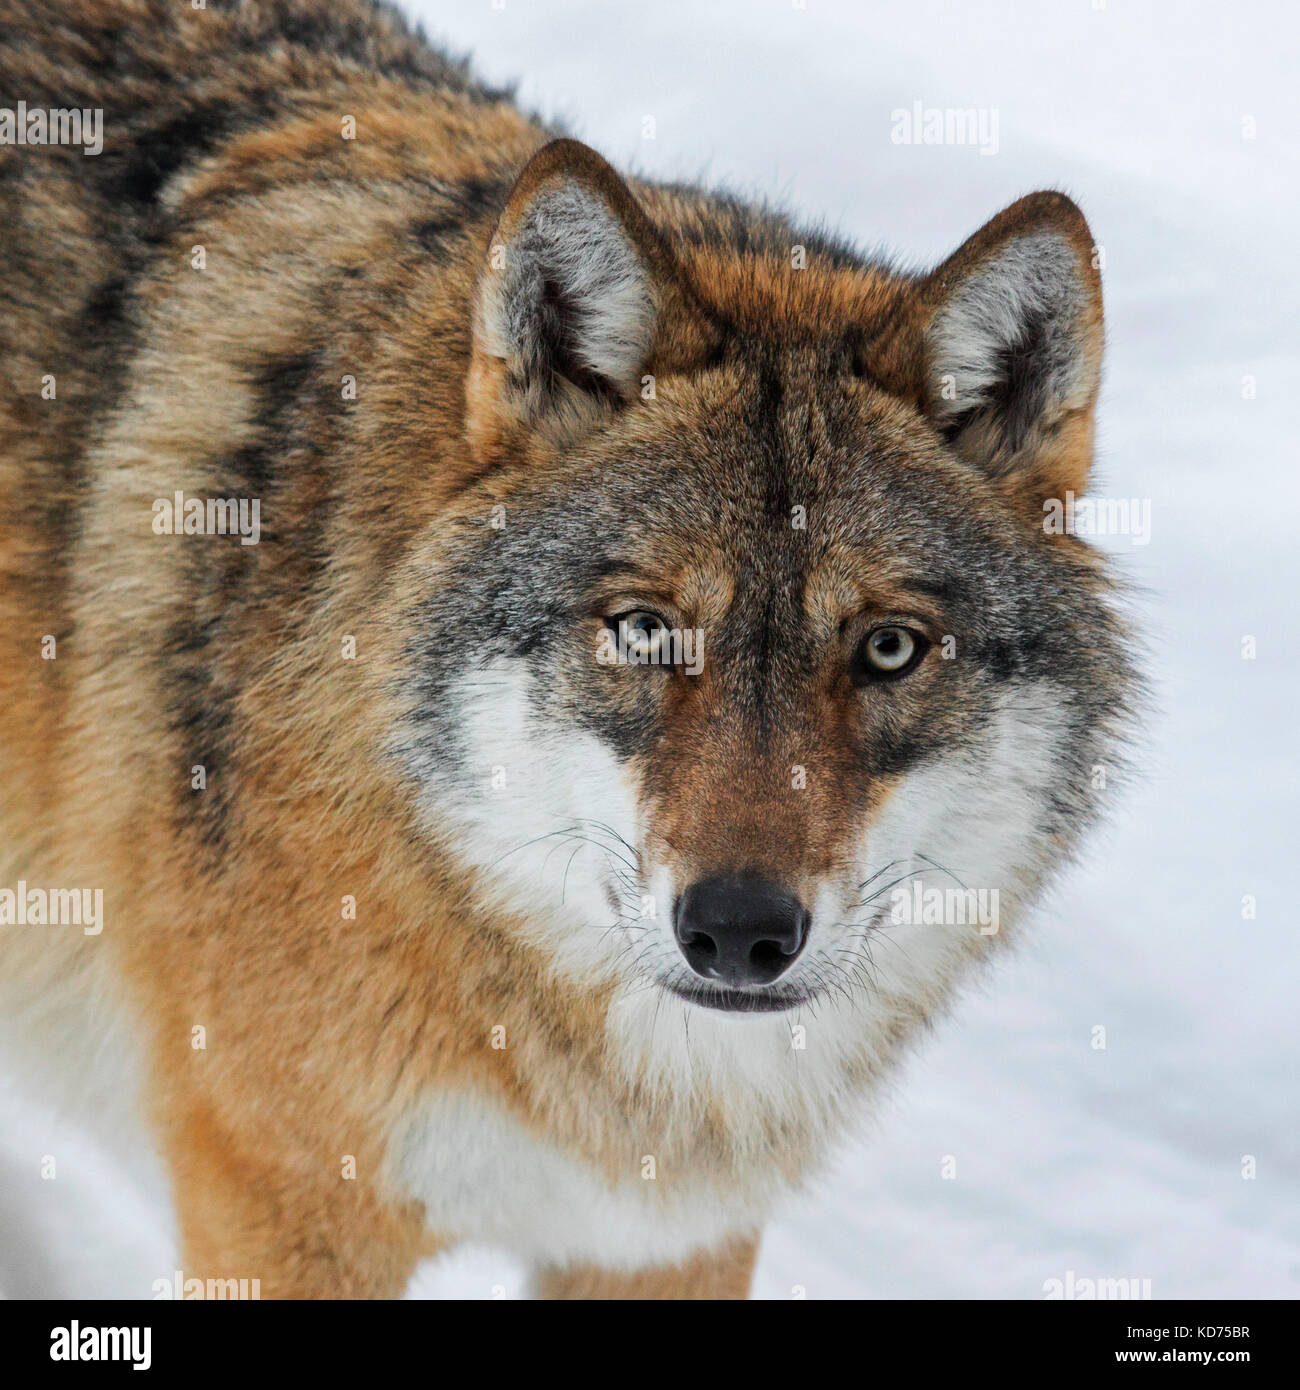 Close up portrait of gray wolf / grey wolf (Canis lupus) in the snow in winter Stock Photo